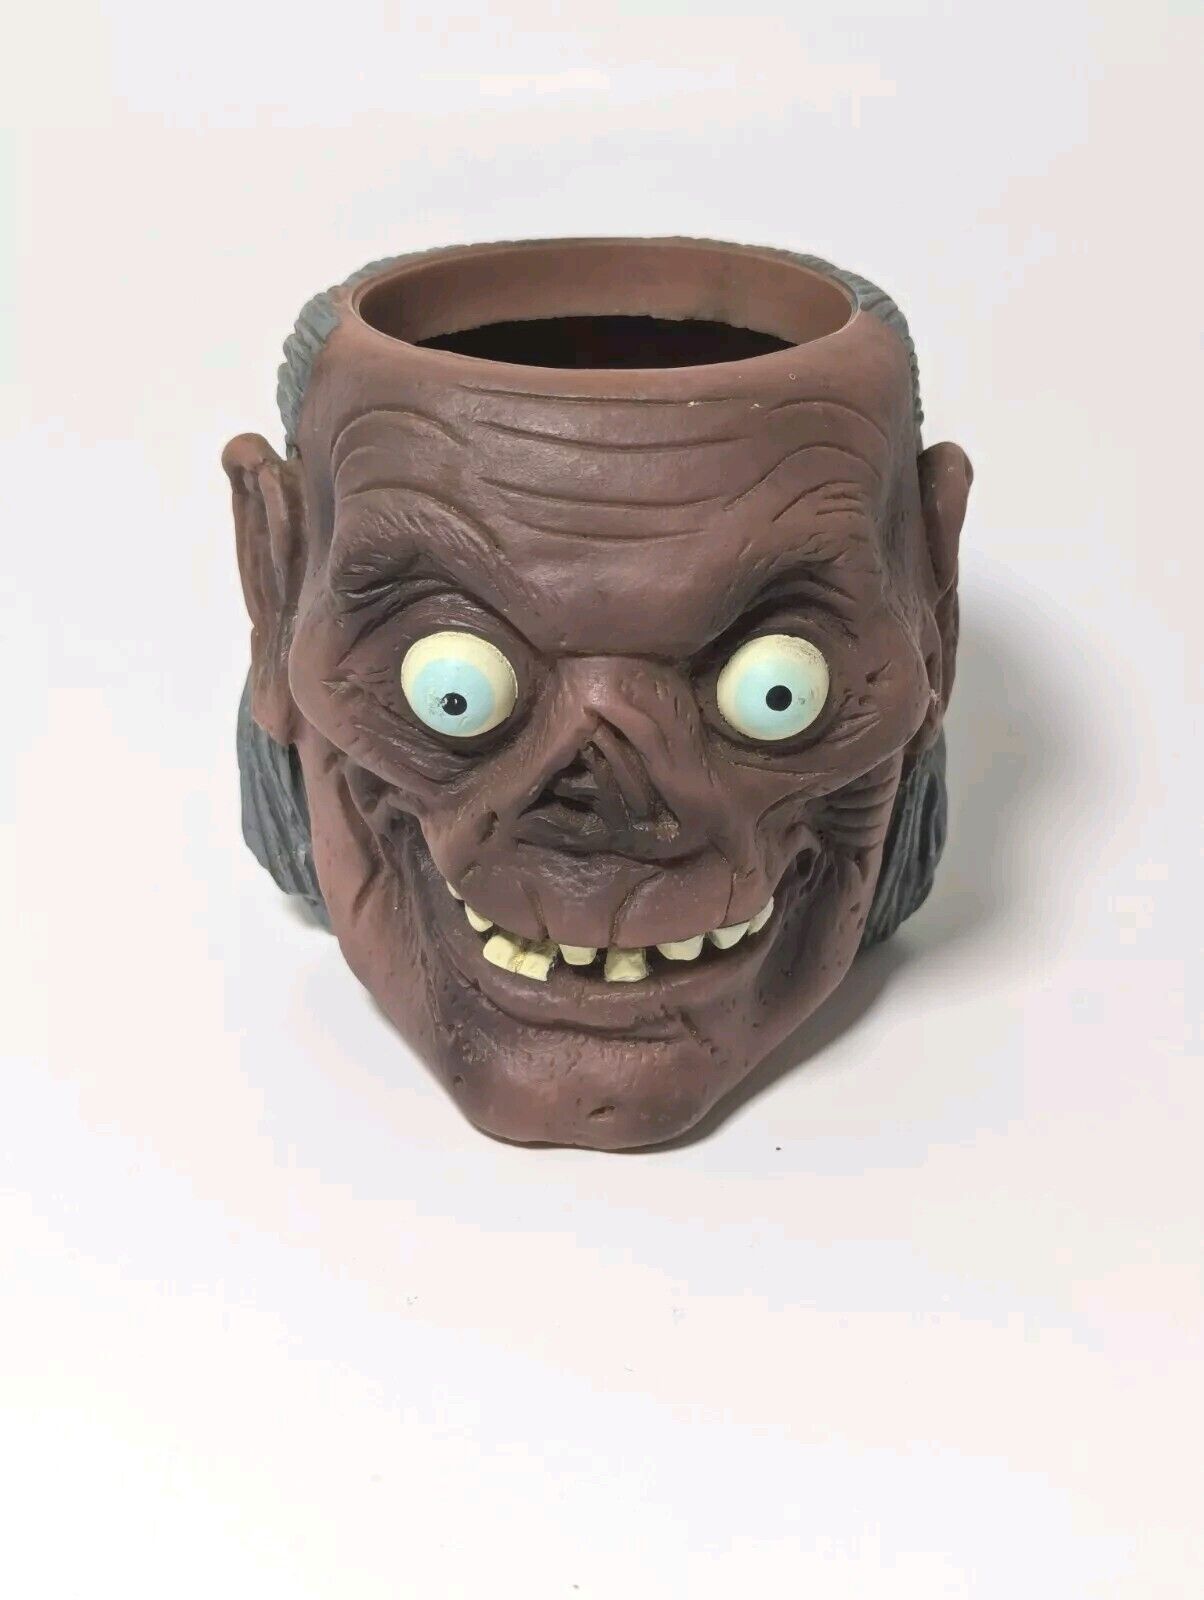 Vintage HBO Tales From The Crypt Keeper Bud Budweiser Beer Can Holder Koozie